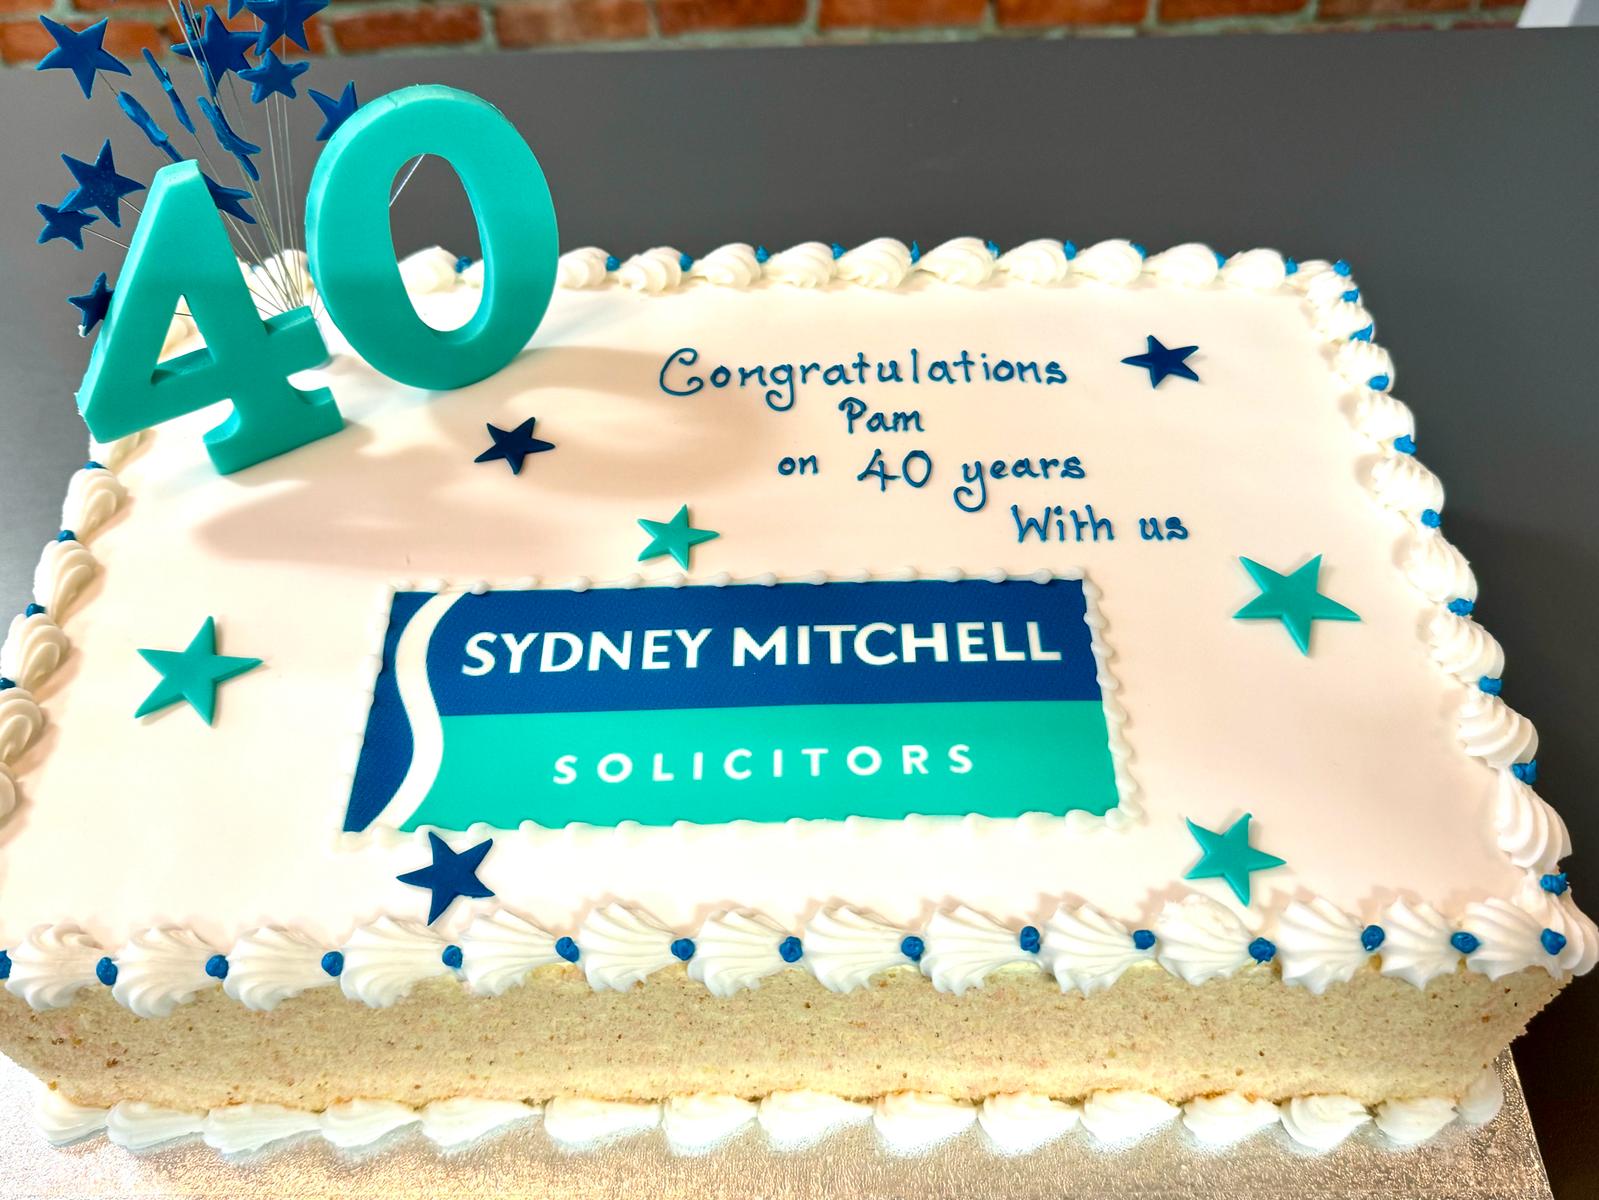 40 years' service celebration for Pamela Moss at Sydney Mitchell LLP